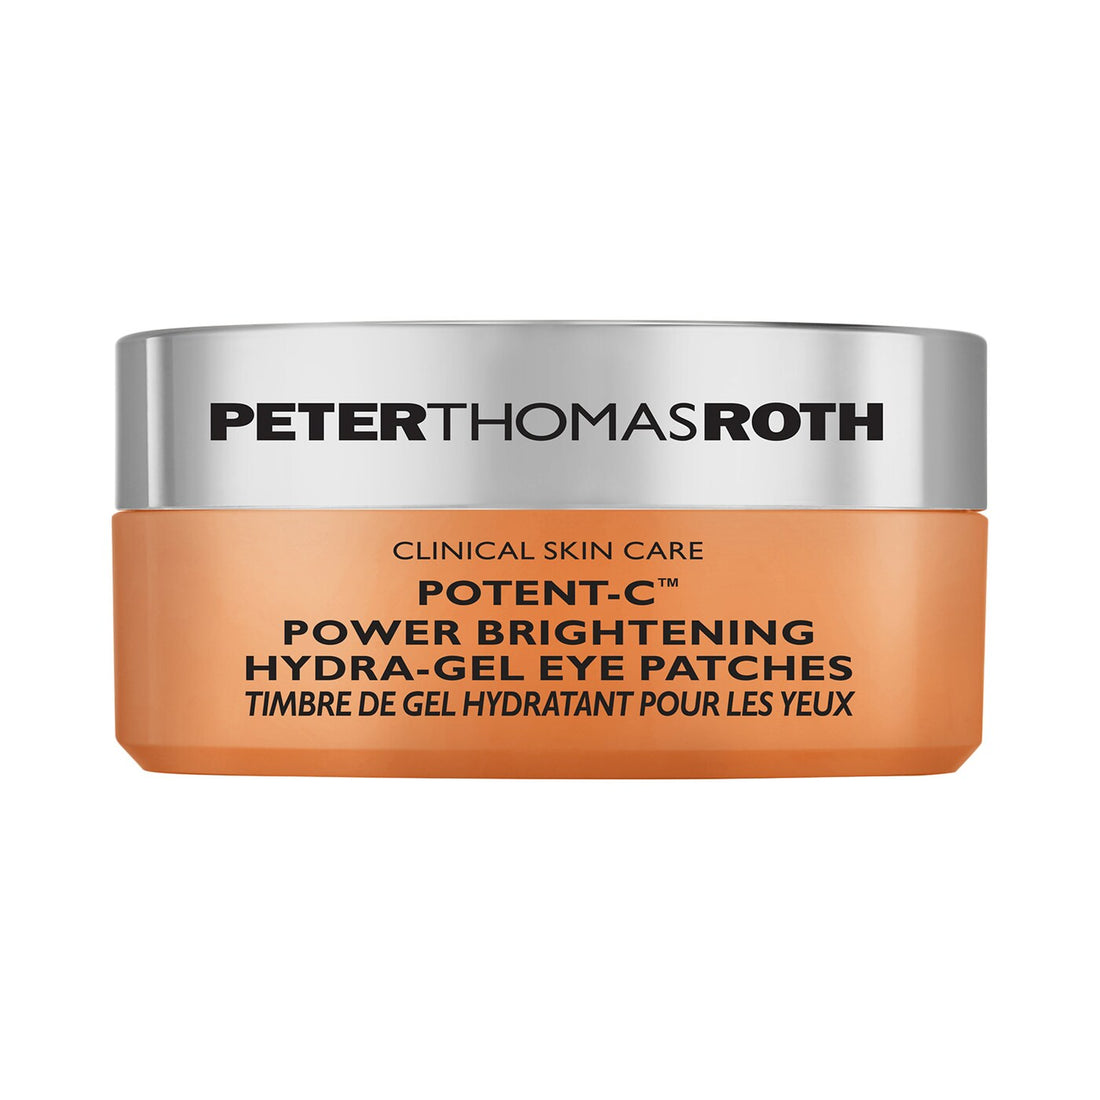 Potent-C Hydra-Gel Eye Patches - 60 patches